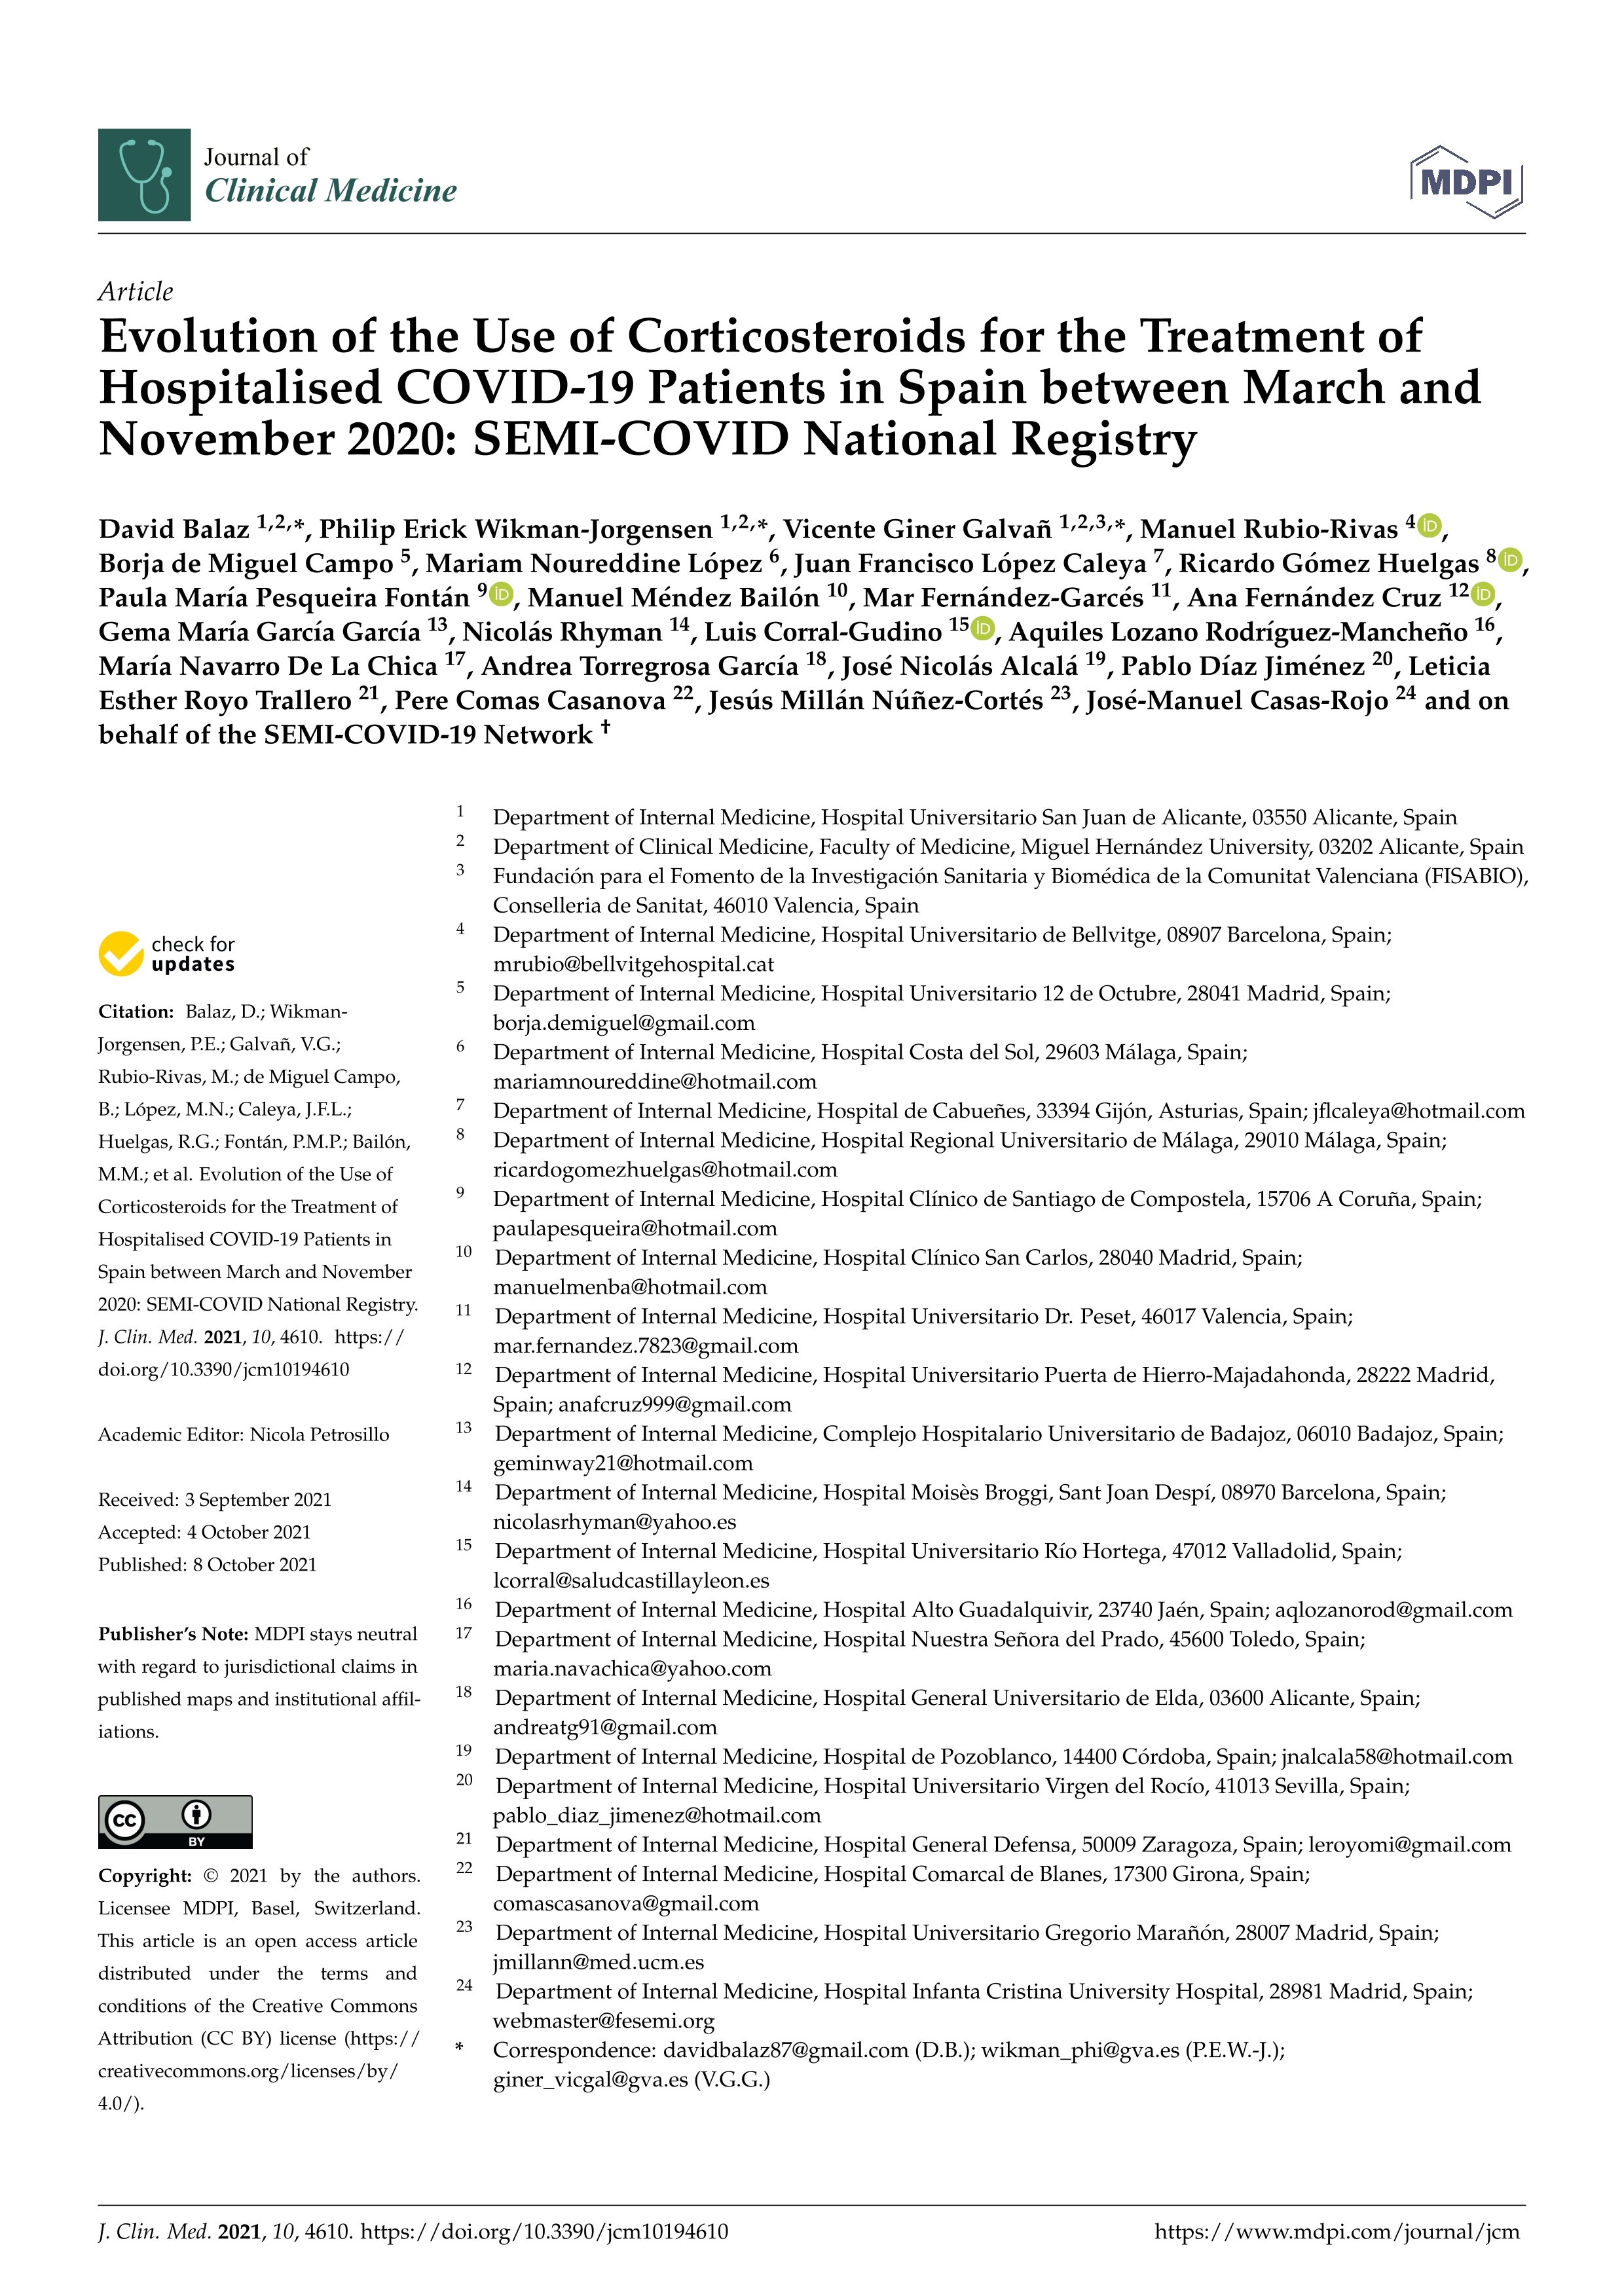 Evolution of the use of corticosteroids for the treatment of hospitalised COVID-19 patients in Spain between March and November 2020: SEMI-COVID national registry